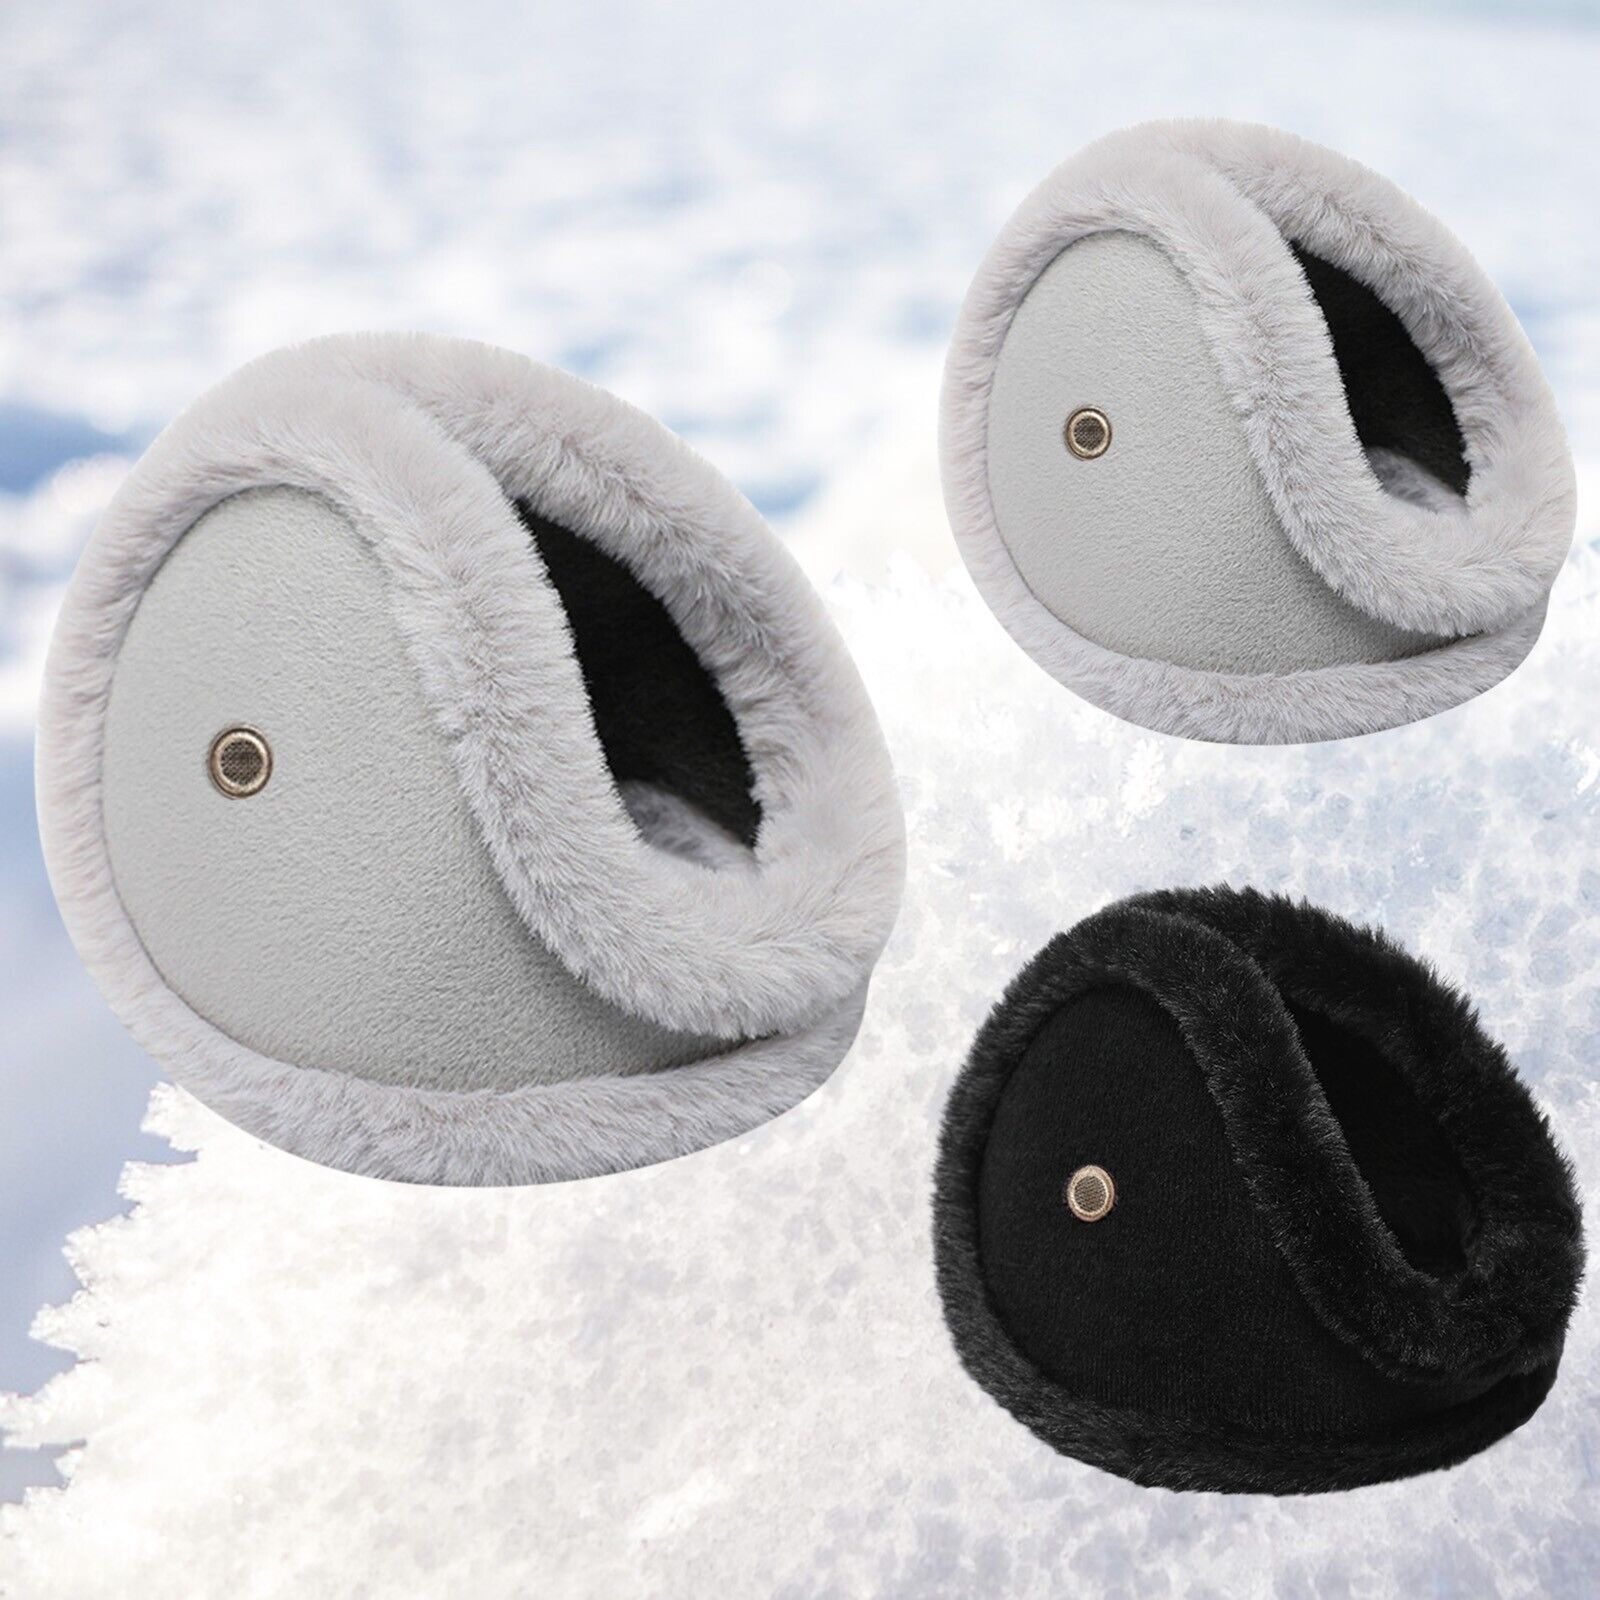 Winter Warm Earmuffs Are Soft And Warm Knitted Ear Warmers Behind The Head Men